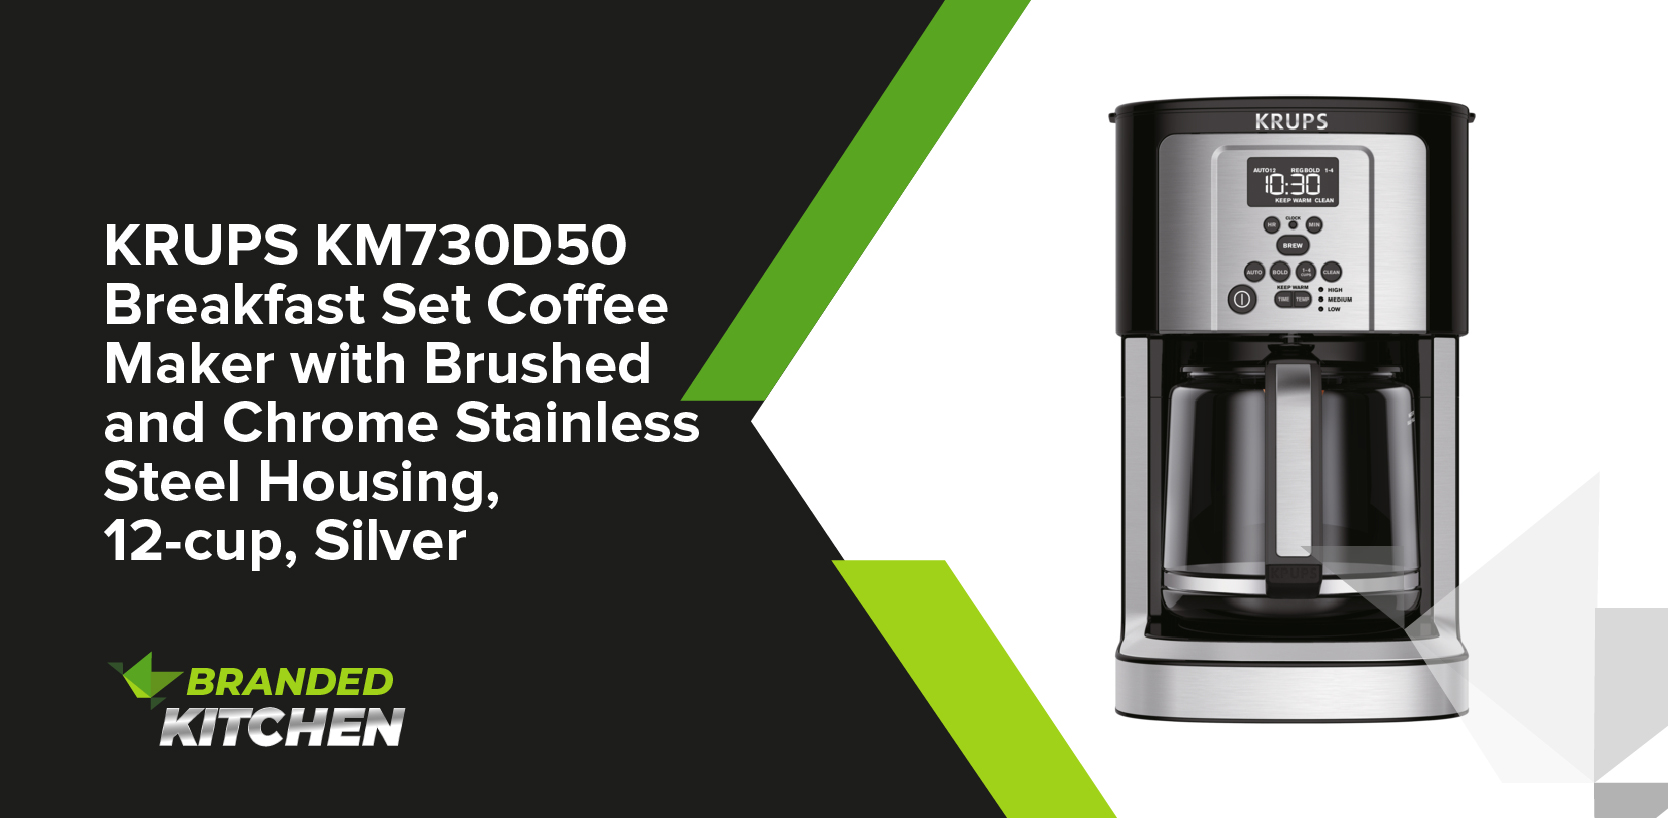 KRUPS KM730D50 Breakfast Set Coffee Maker with Brushed and Chrome Stainless Steel Housing, 12-cup, Silver